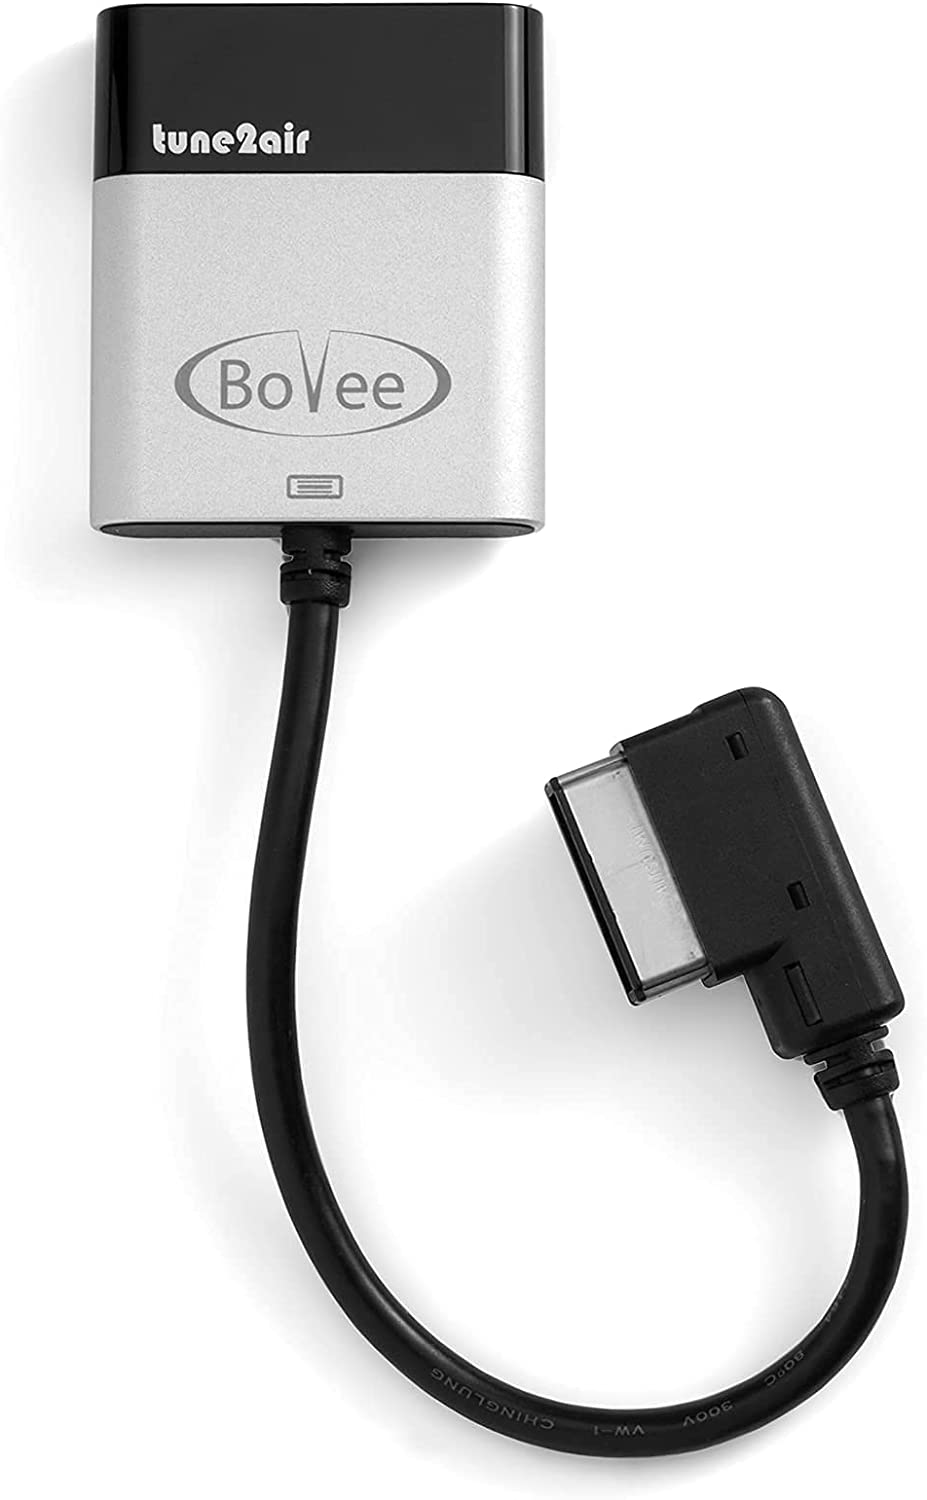  Buy Bovee Bluetooth Car Kit for AUDI, VW, MB - Music Interface  Adaptor for in car iPod Integration (WMA3000A AMI/MDI/MMI connector) Online  at Low Prices in India